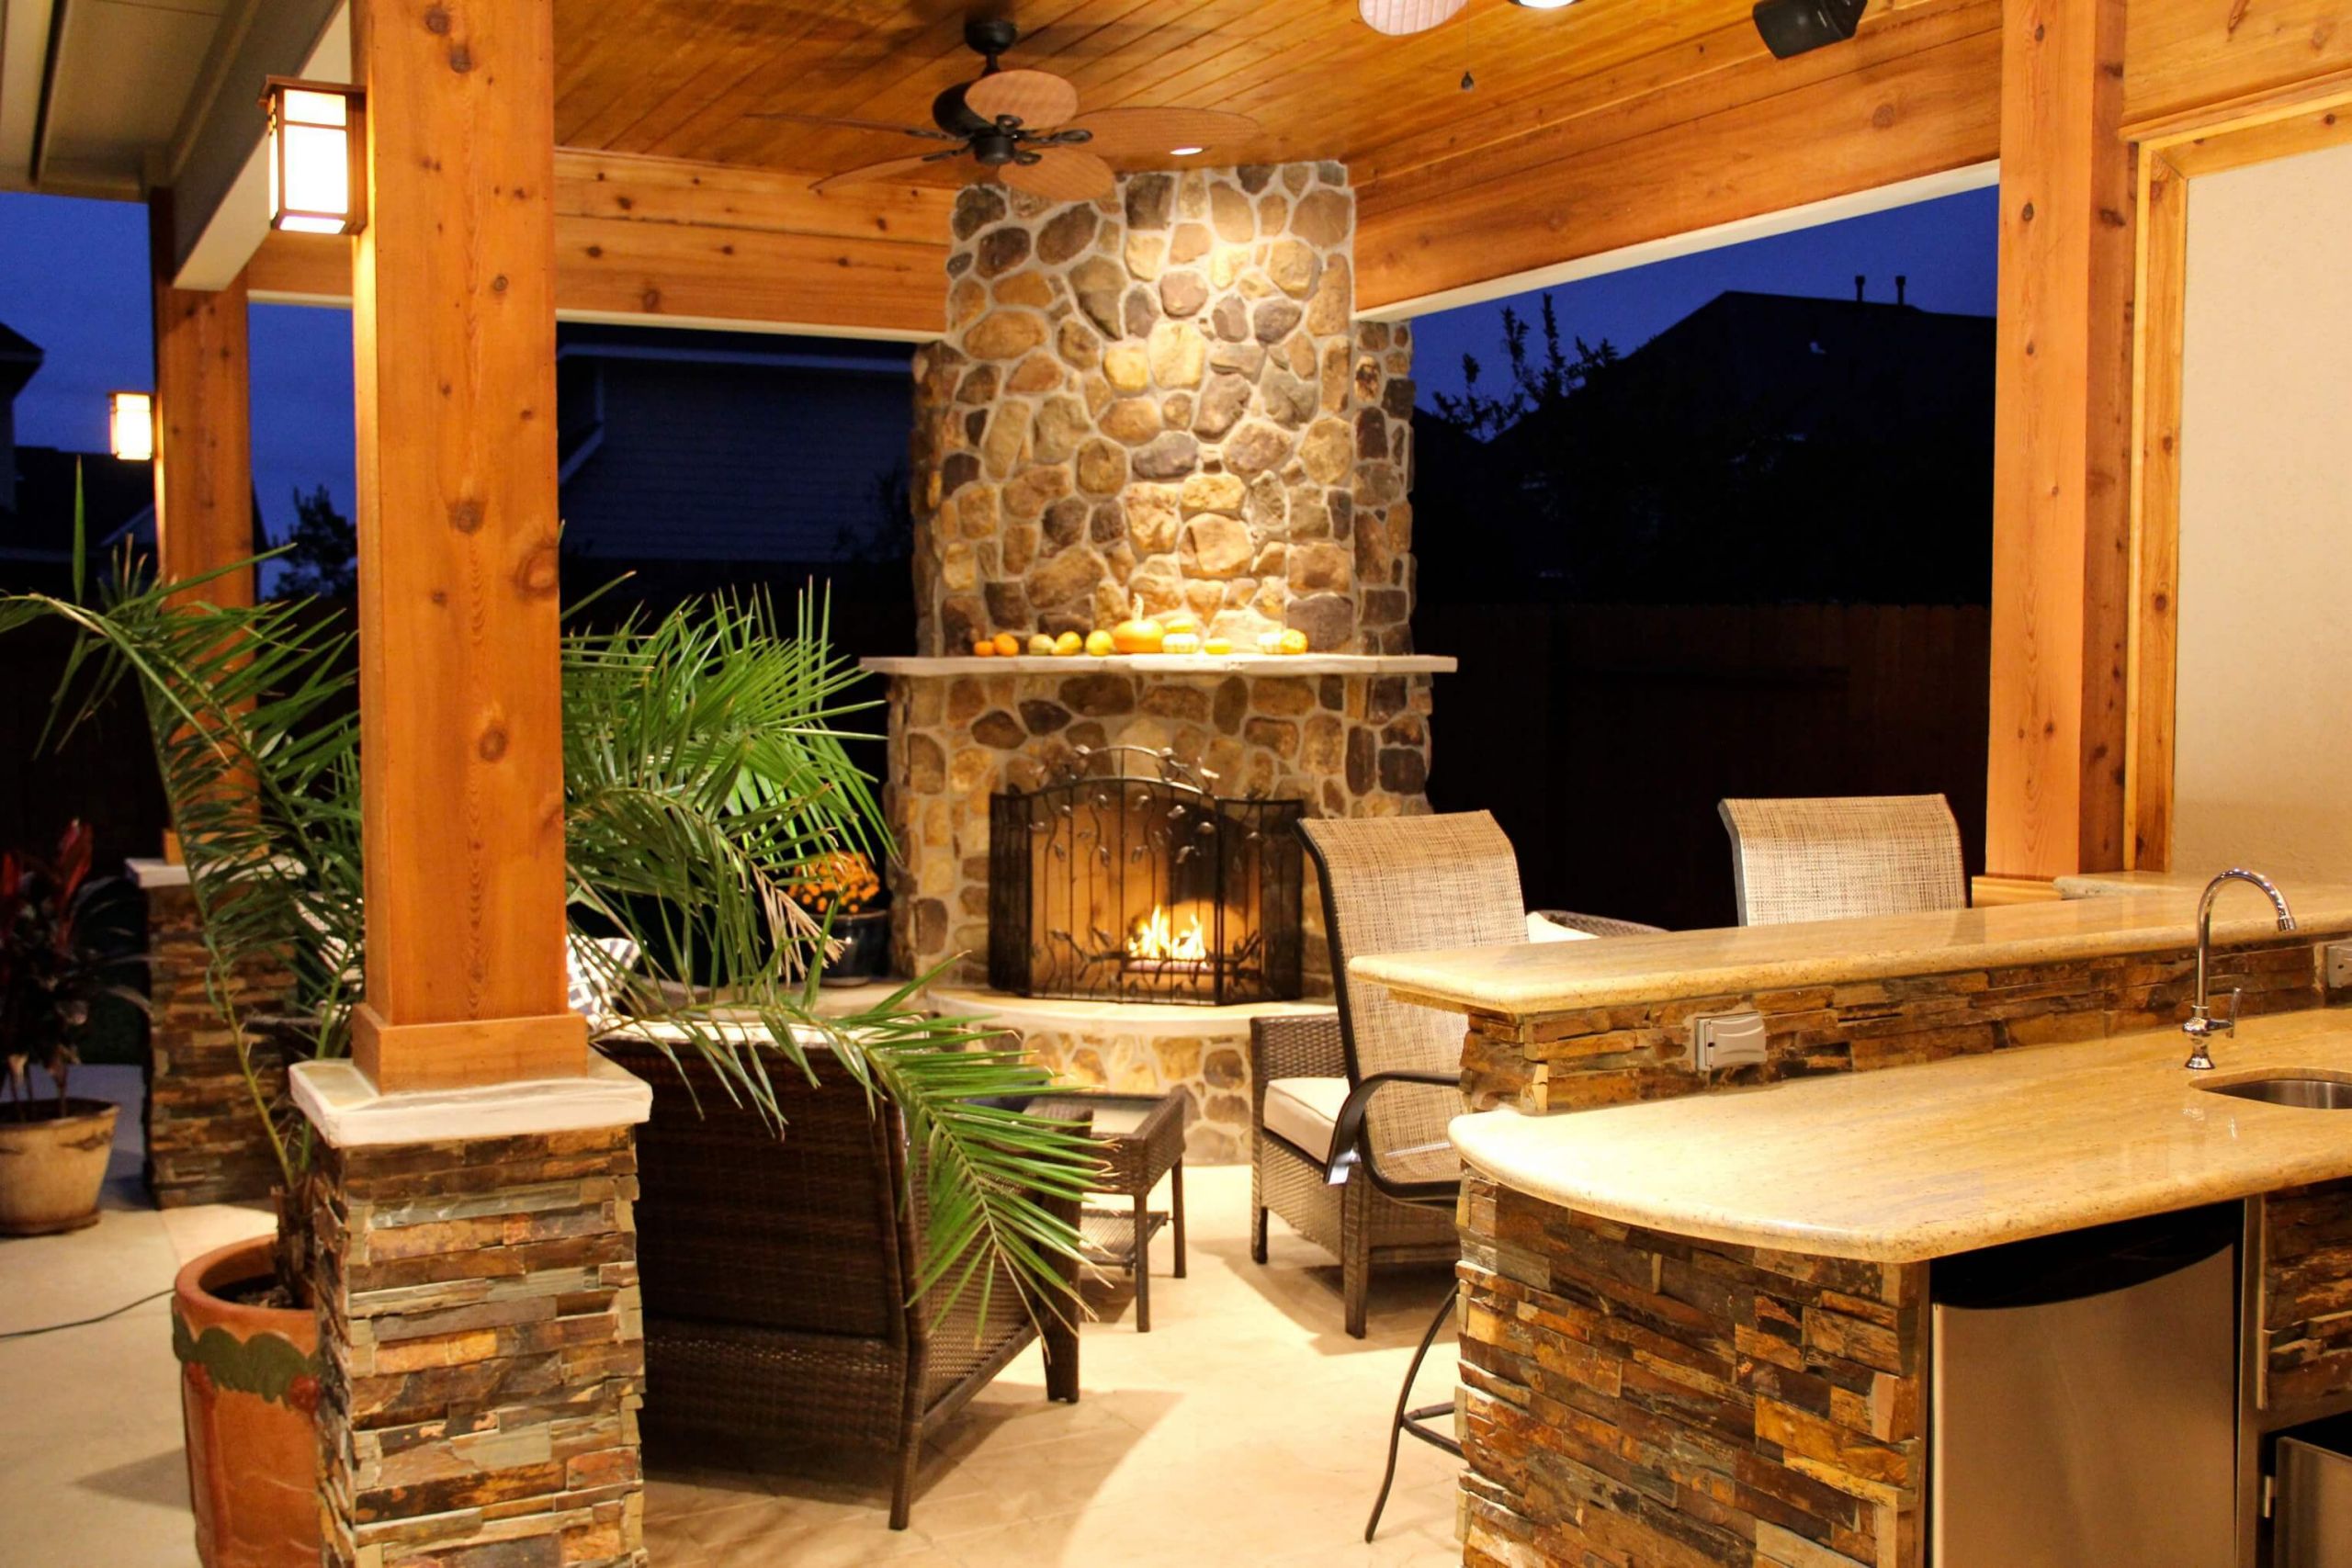 Outdoor Kitchen And Fireplace Ideas
 Patio Cover With Fireplace & Kitchen In Firethorne Texas